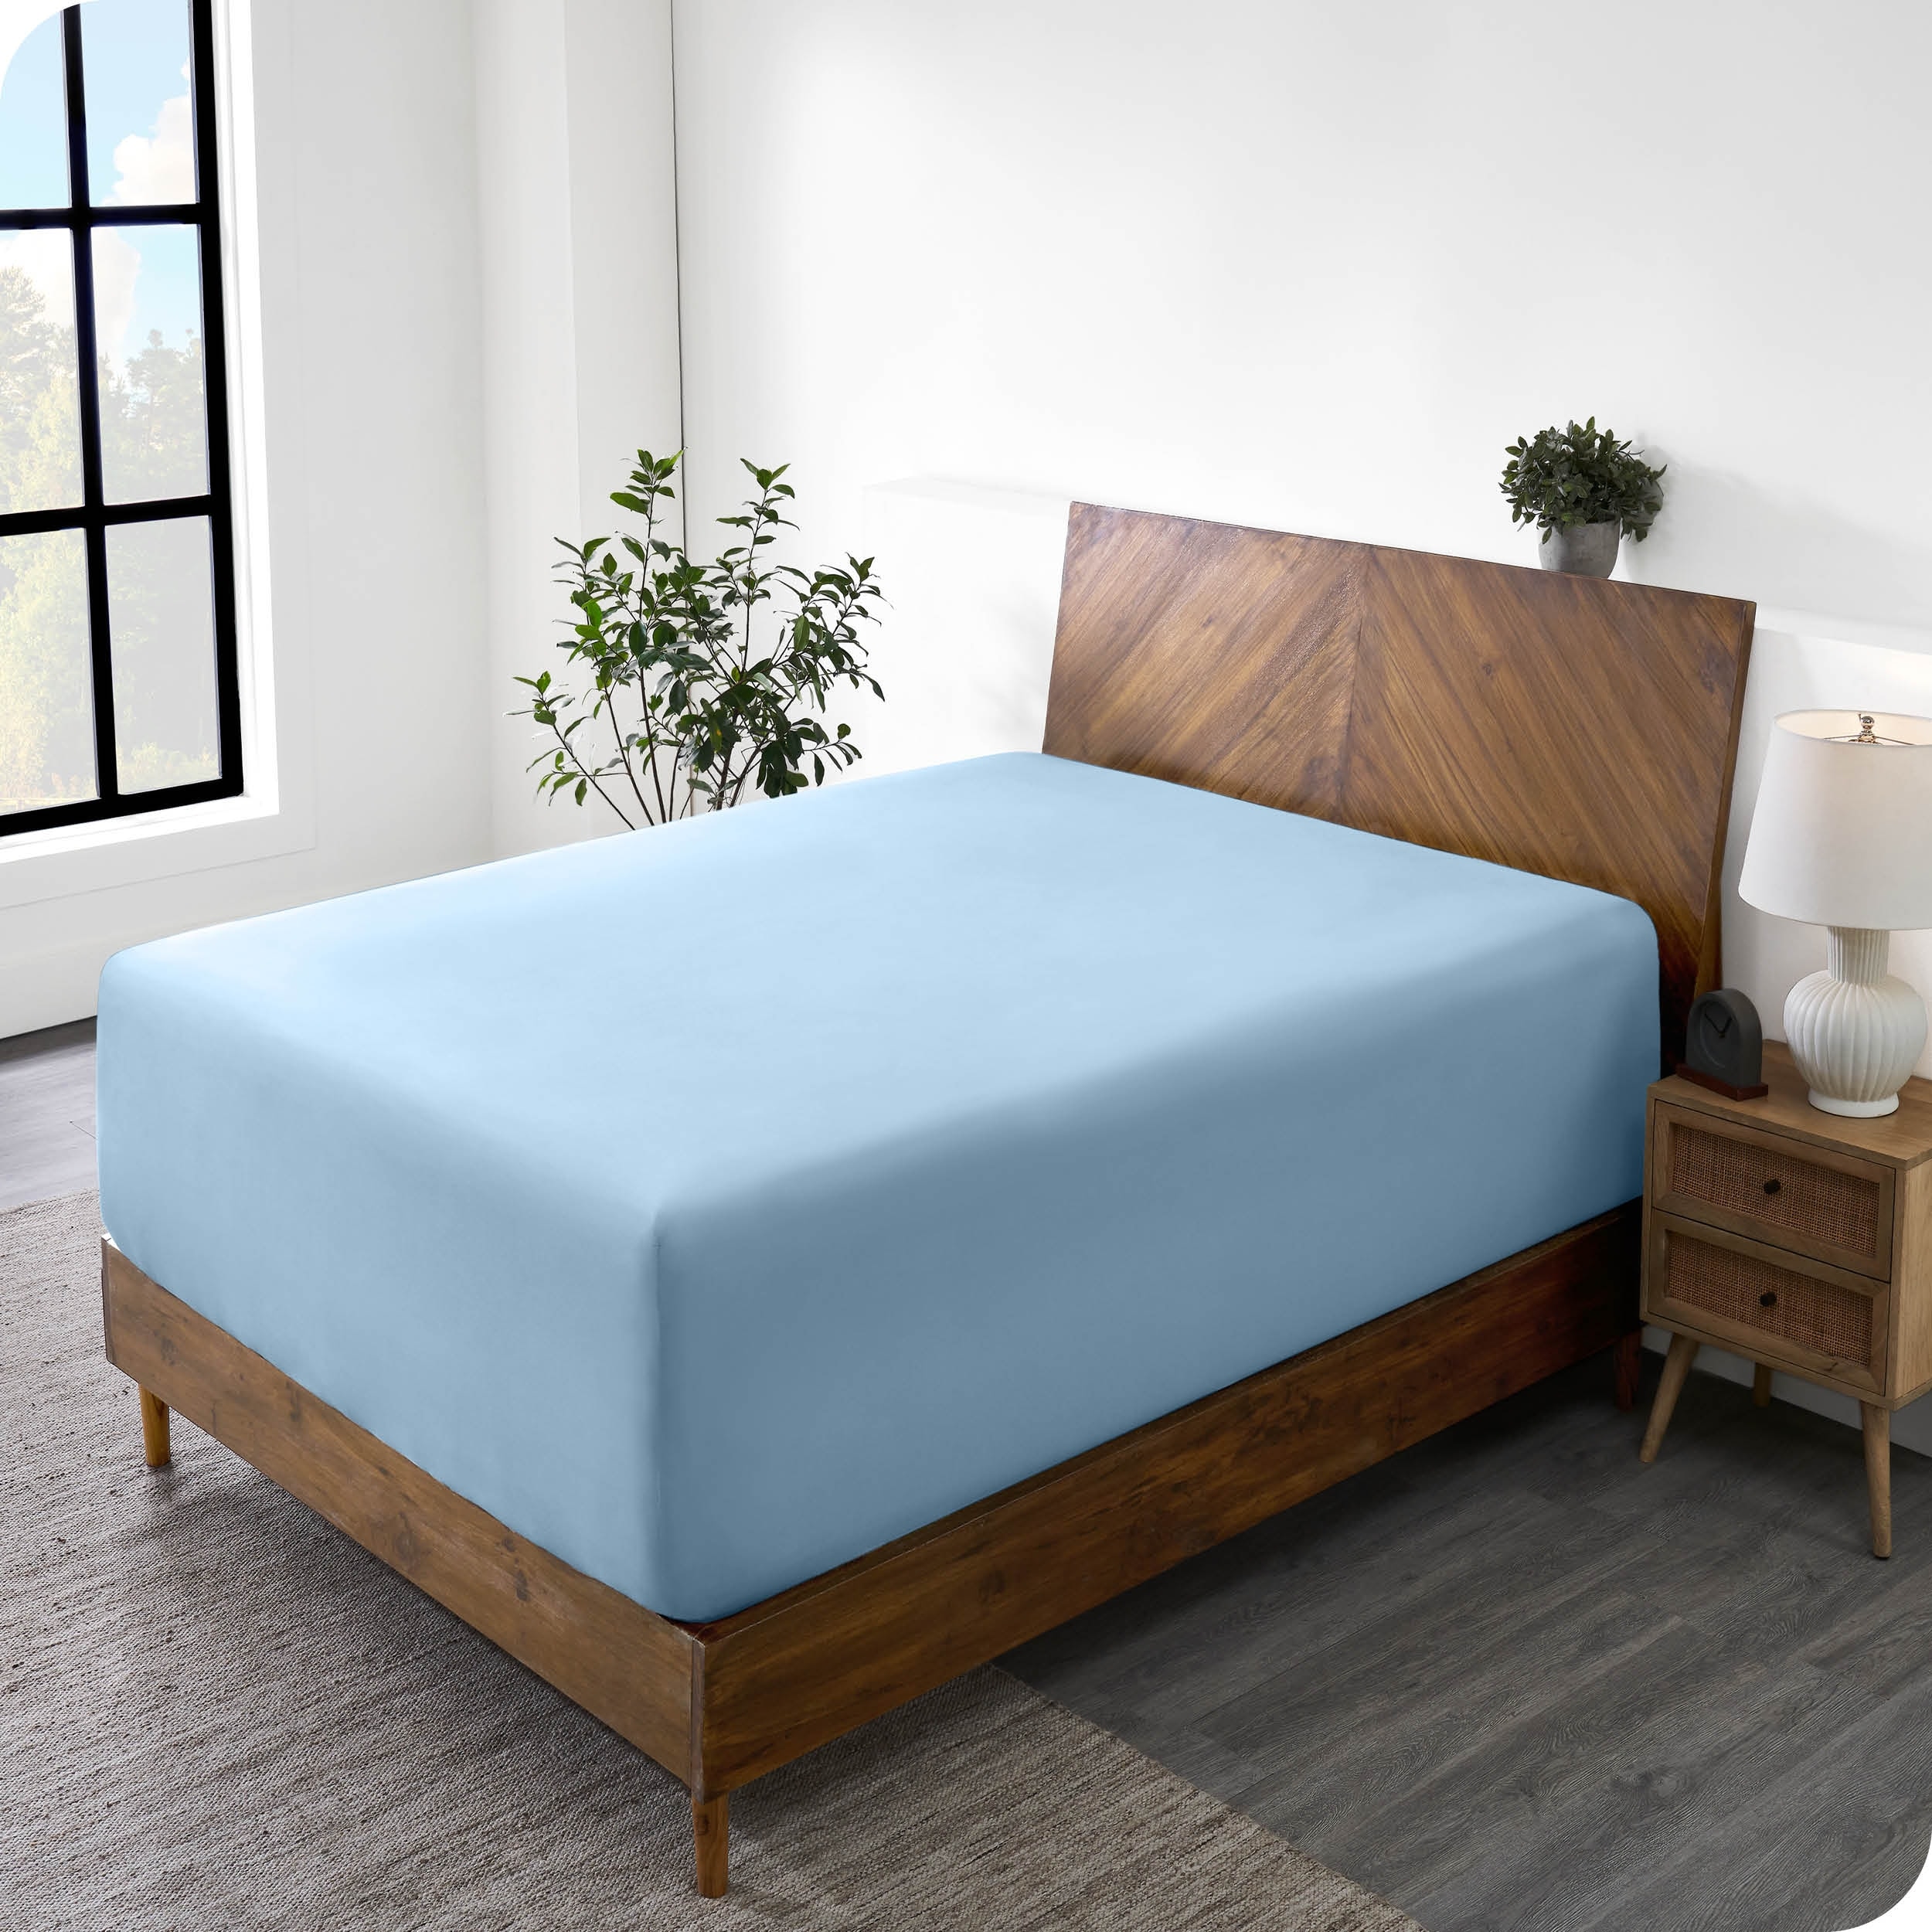 https://ak1.ostkcdn.com/images/products/is/images/direct/9114d4b0da5da415ad4a9b4ba7f19cf16e040549/Bare-Home-Ultra-Soft-Microfiber-22-Inch-Extra-Deep-Pocket-Fitted-Sheet.jpg